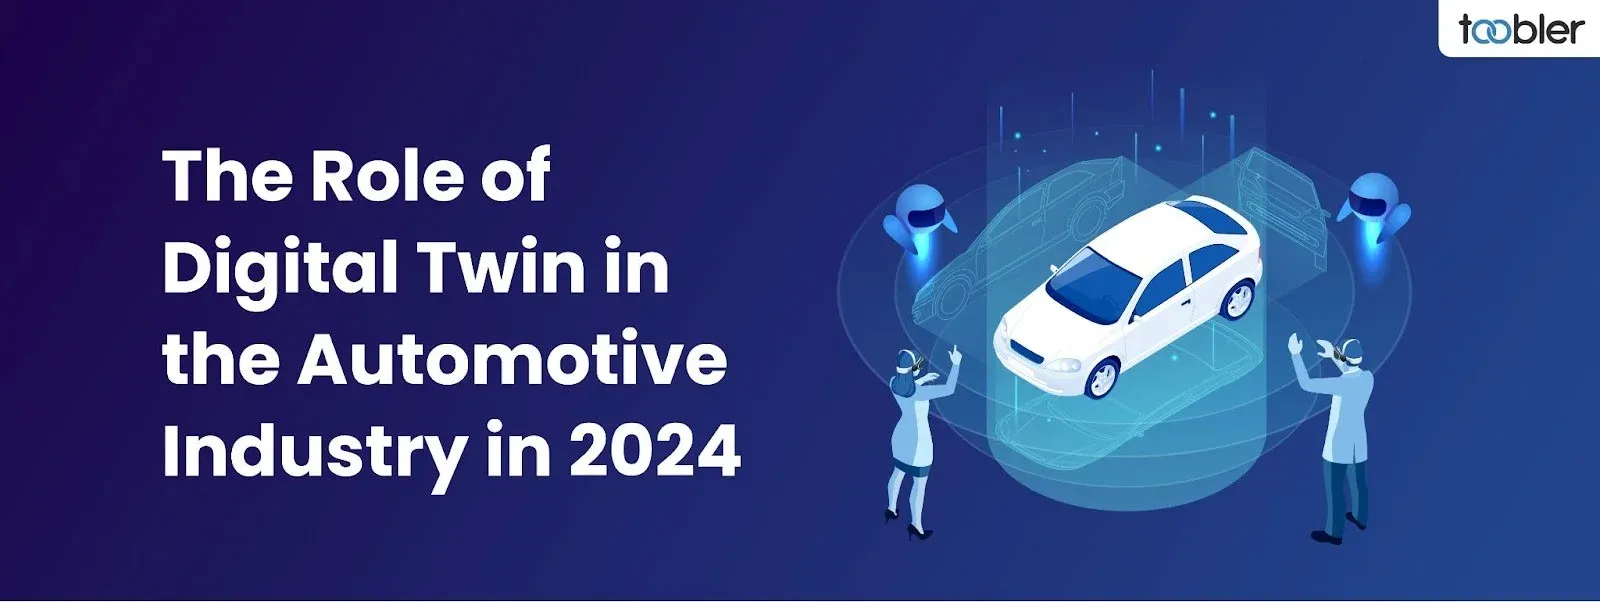 The Role of Digital Twin in the Automotive Industry in 2024